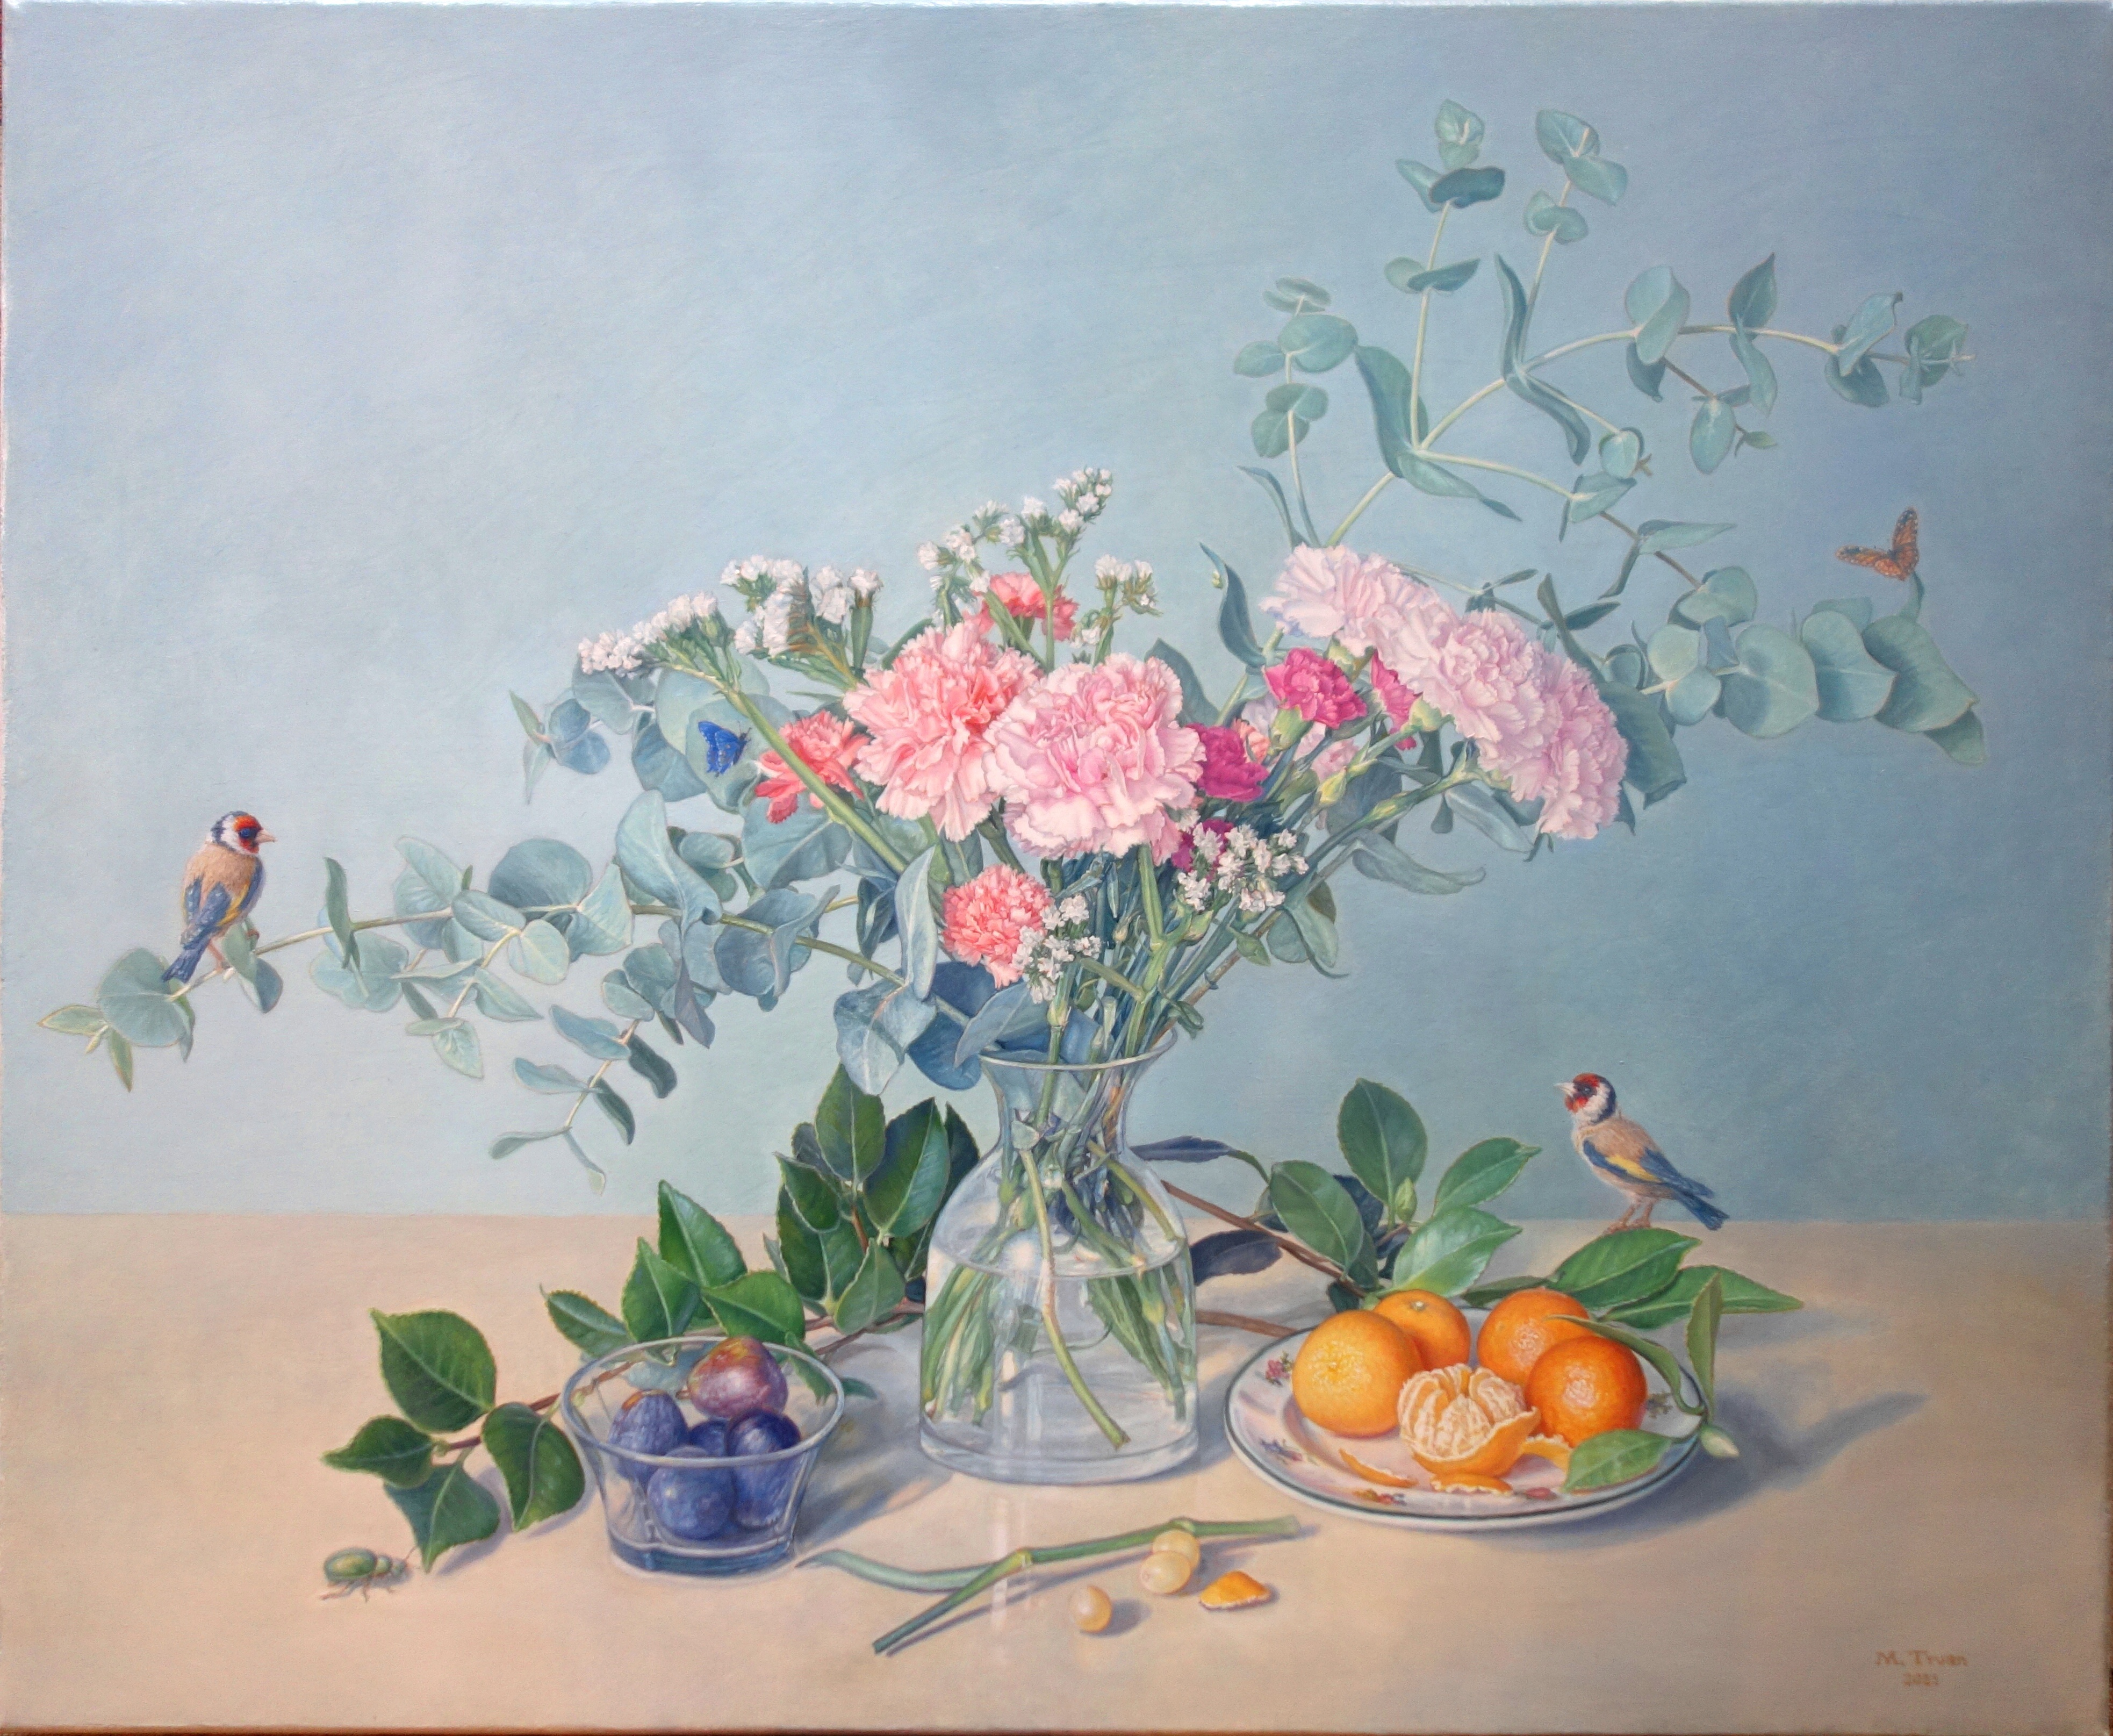 Carnations, mandarins and goldfinches, 2020, oil on canvas, 23.6x28.7 in.